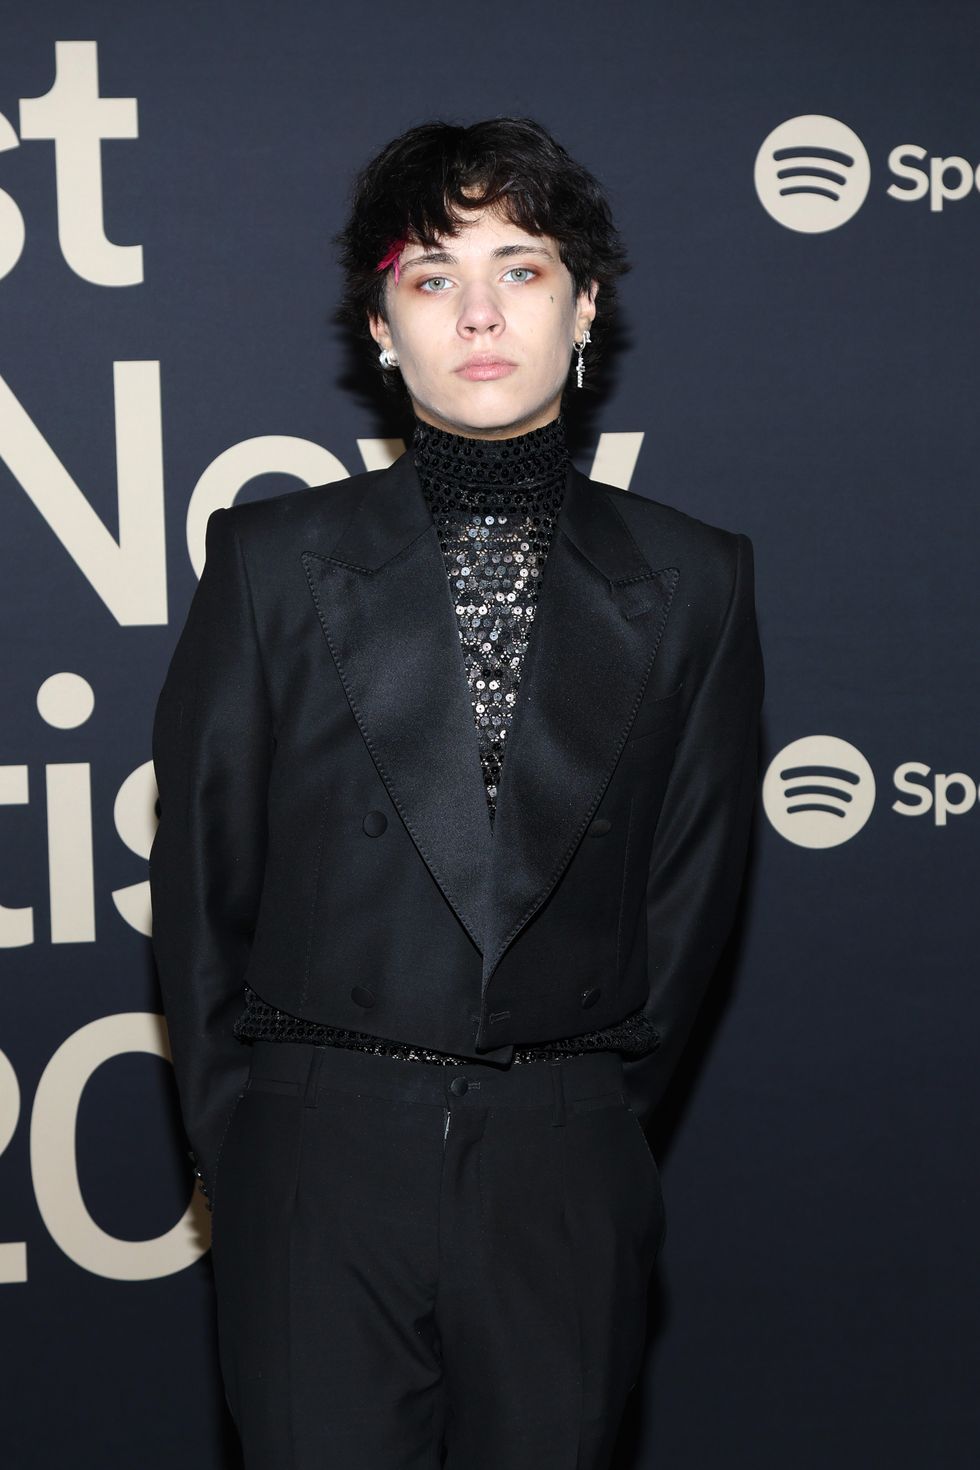 west hollywood, california february 02 landon barker attends the 2023 spotify best new artist party at pacific design center on february 02, 2023 in west hollywood, california photo by steven simionefilmmagic